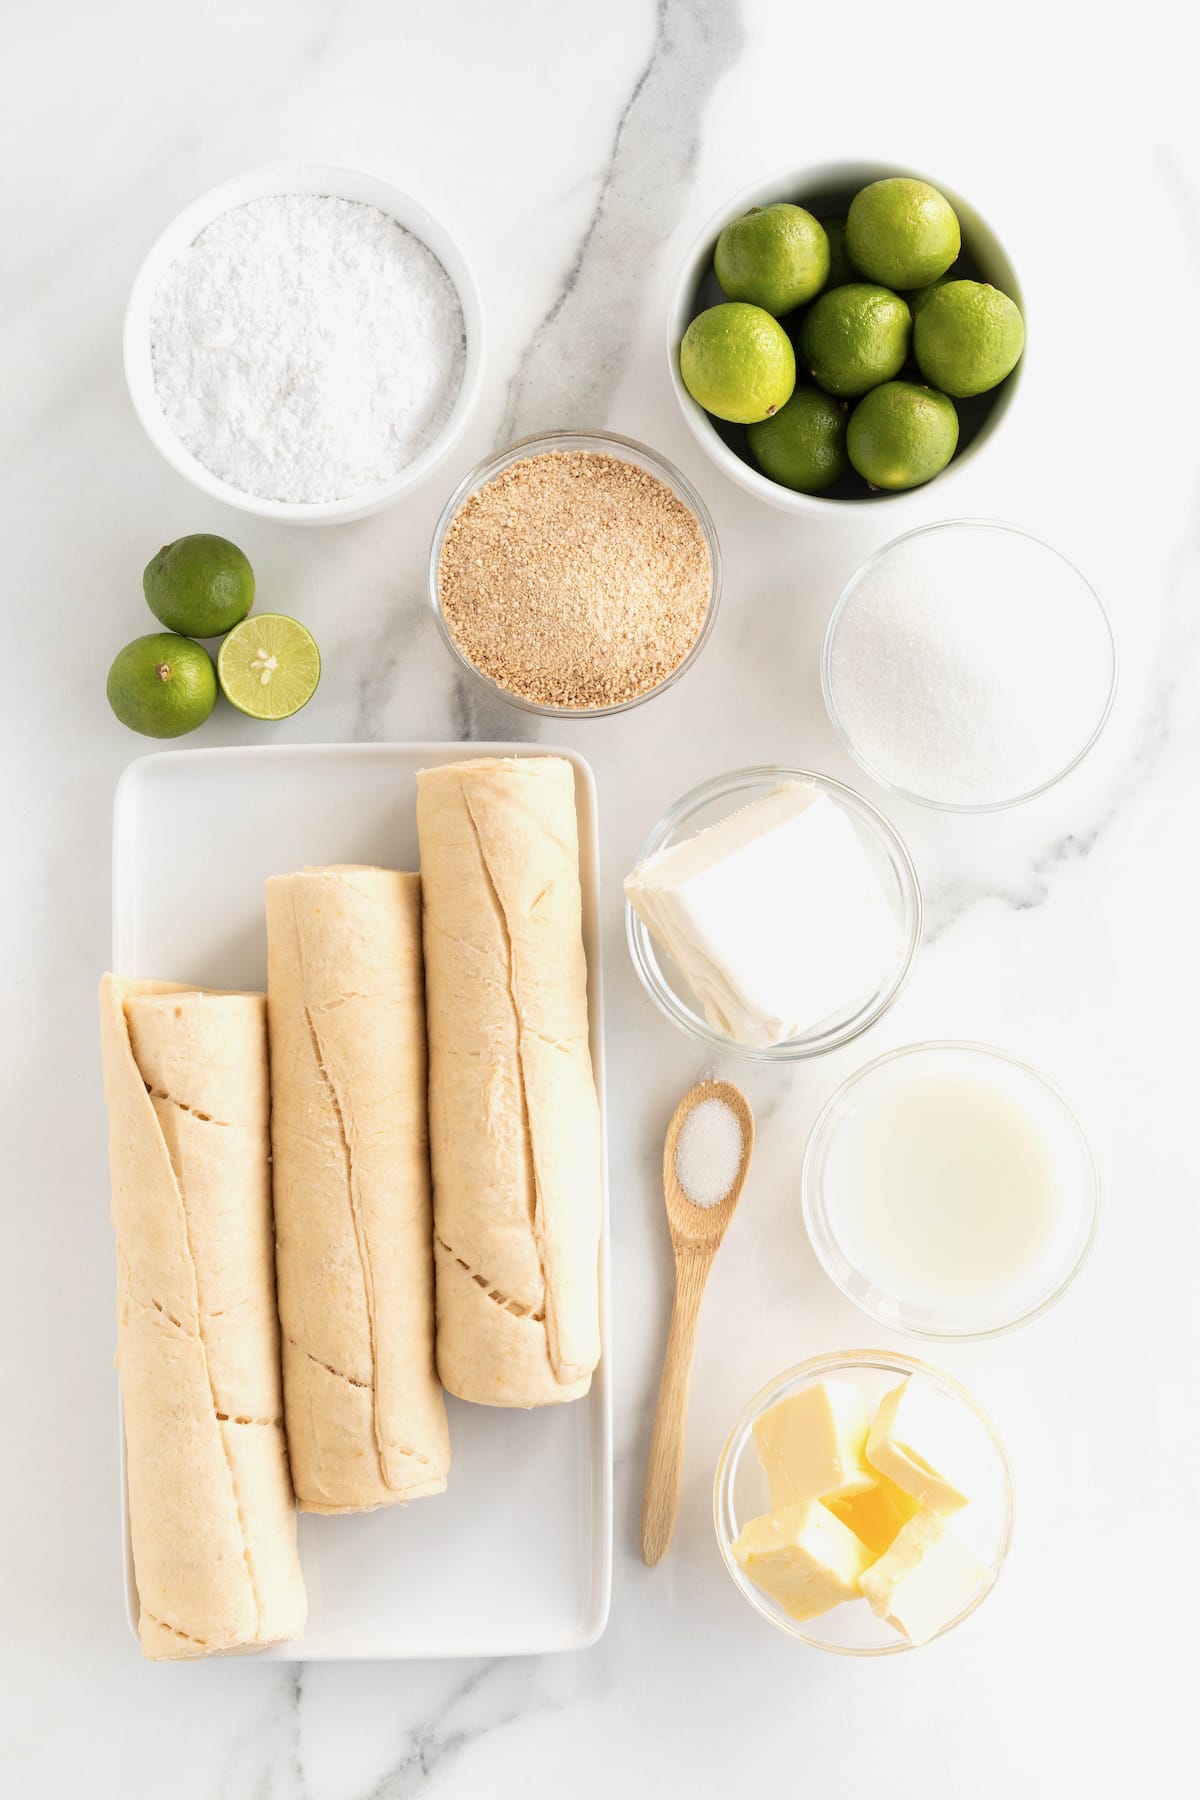 Ingredients to make key lime cruffins in small glass containers on a whit marble counter.